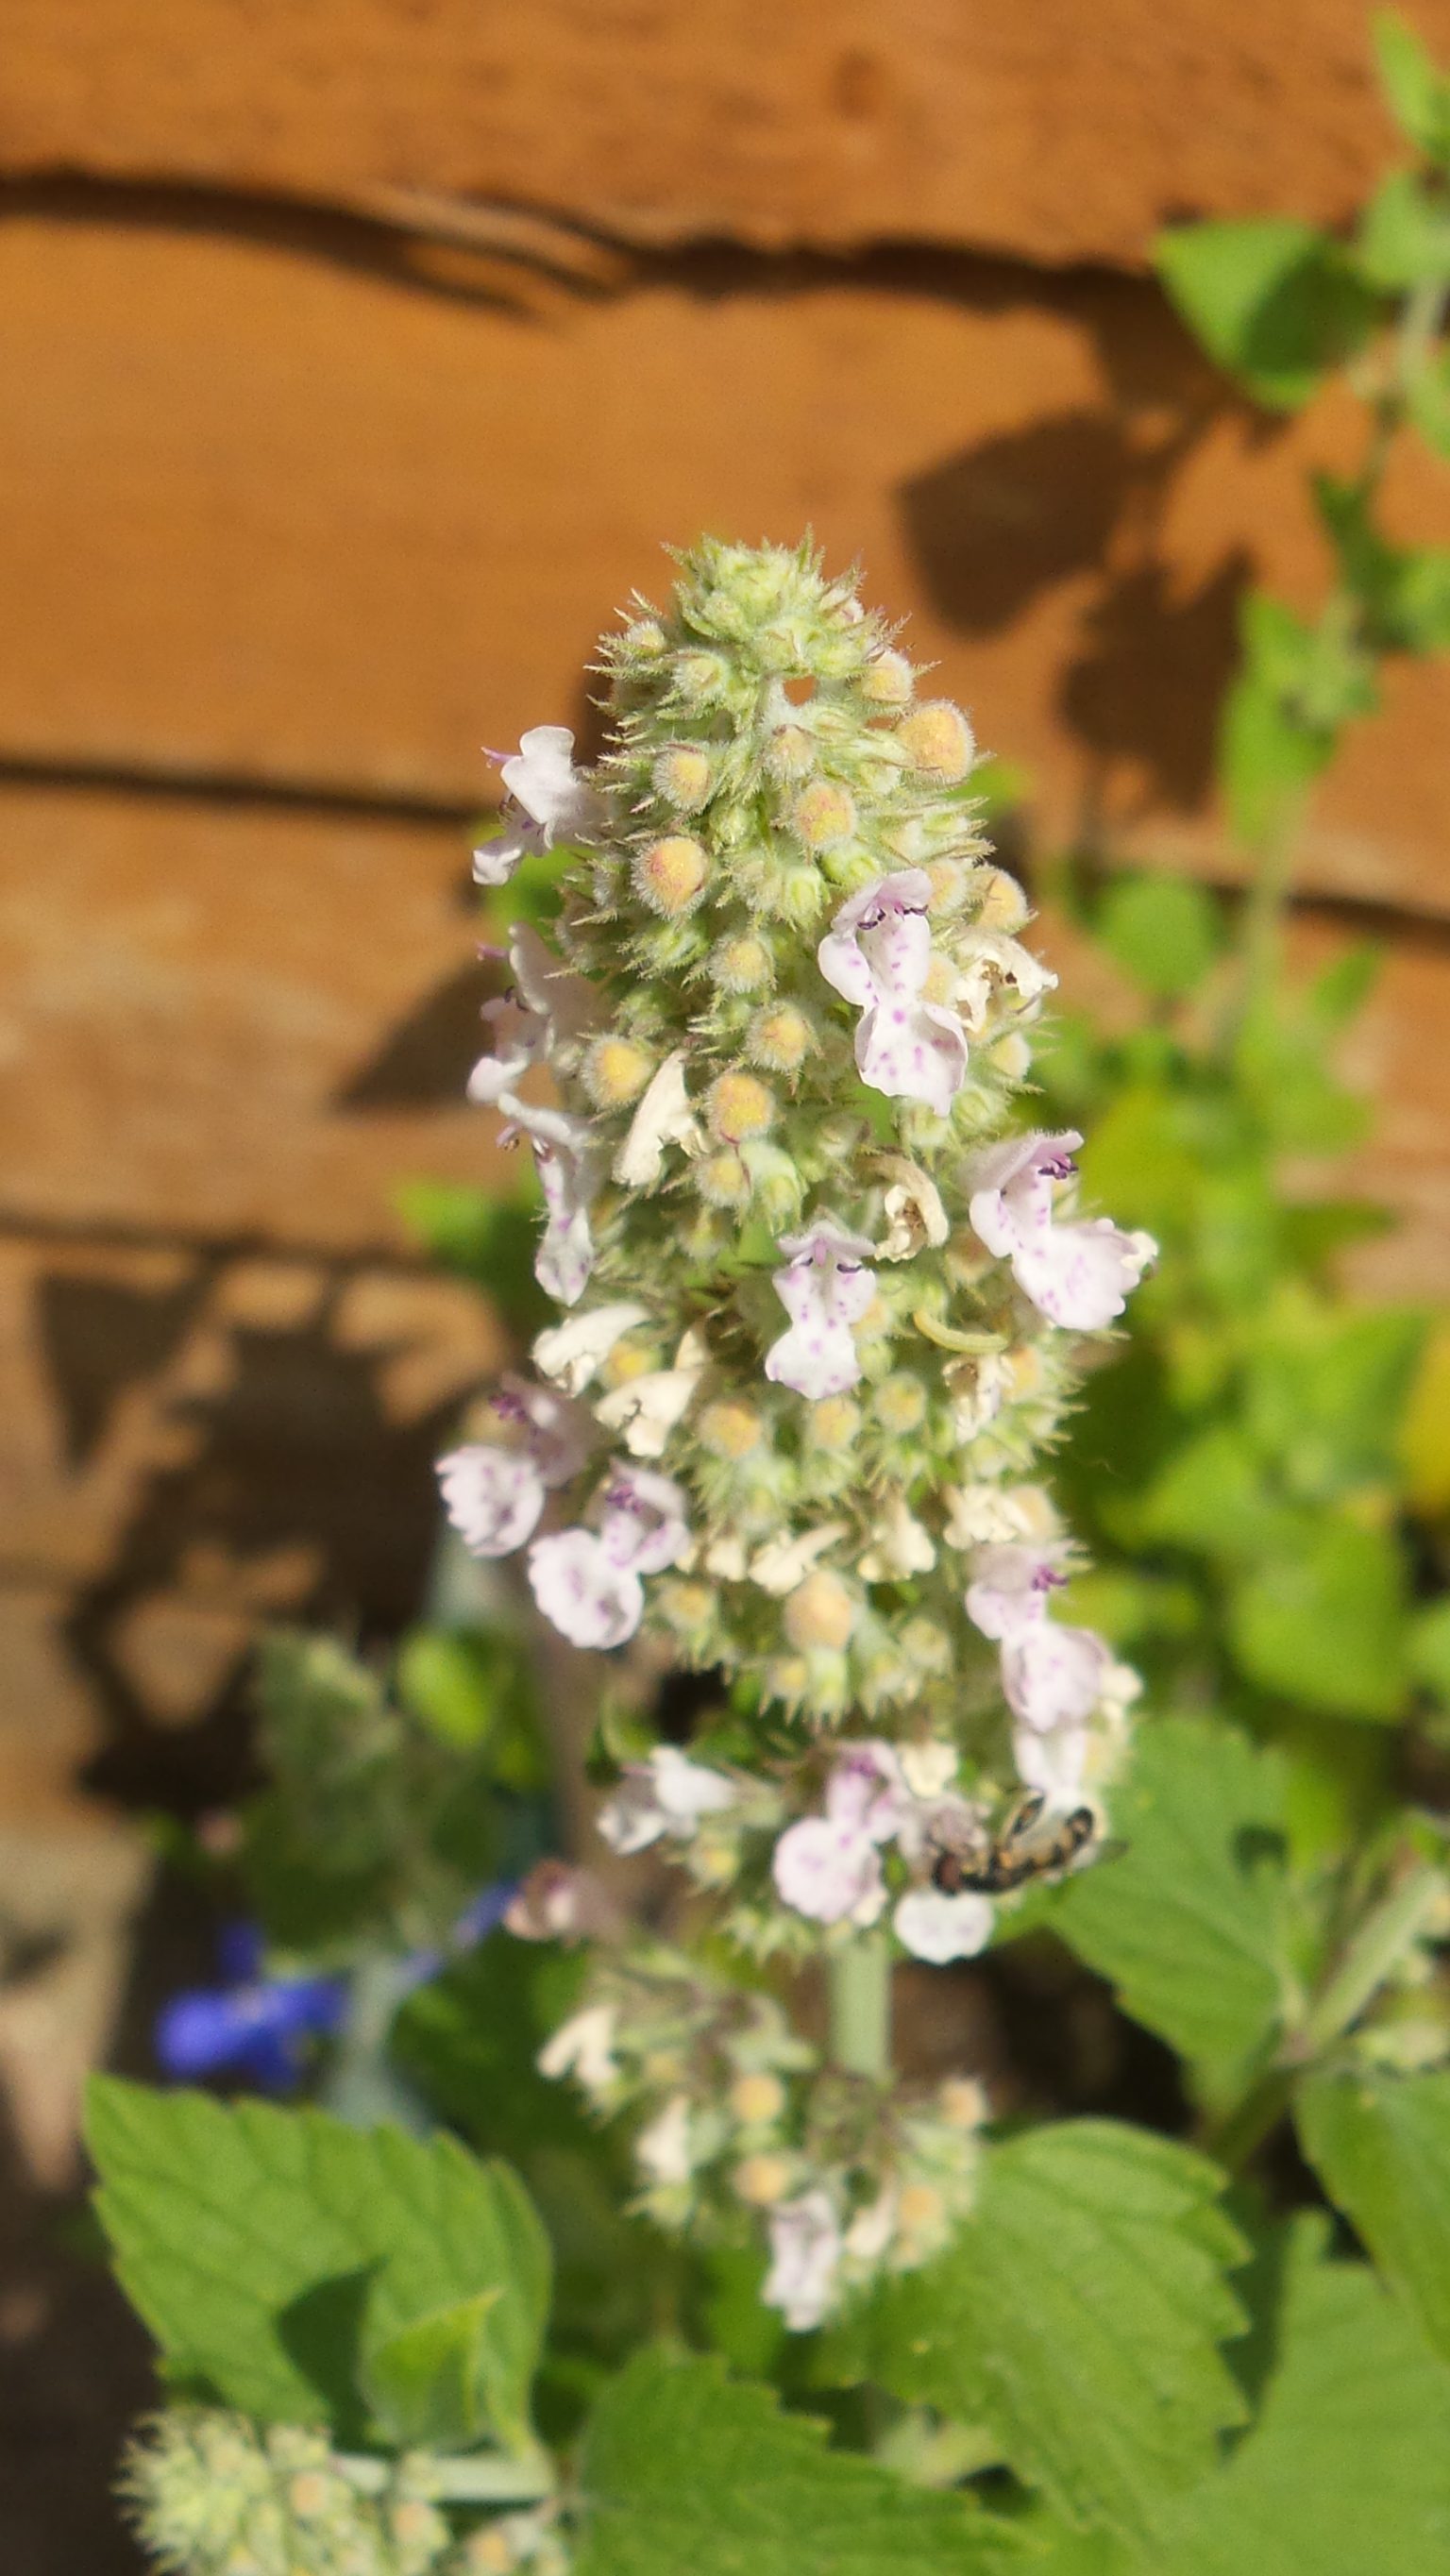 Catnip Nepeta Cataria Organically Grown Extra Strong Catnip - Home Grown in Wales UK